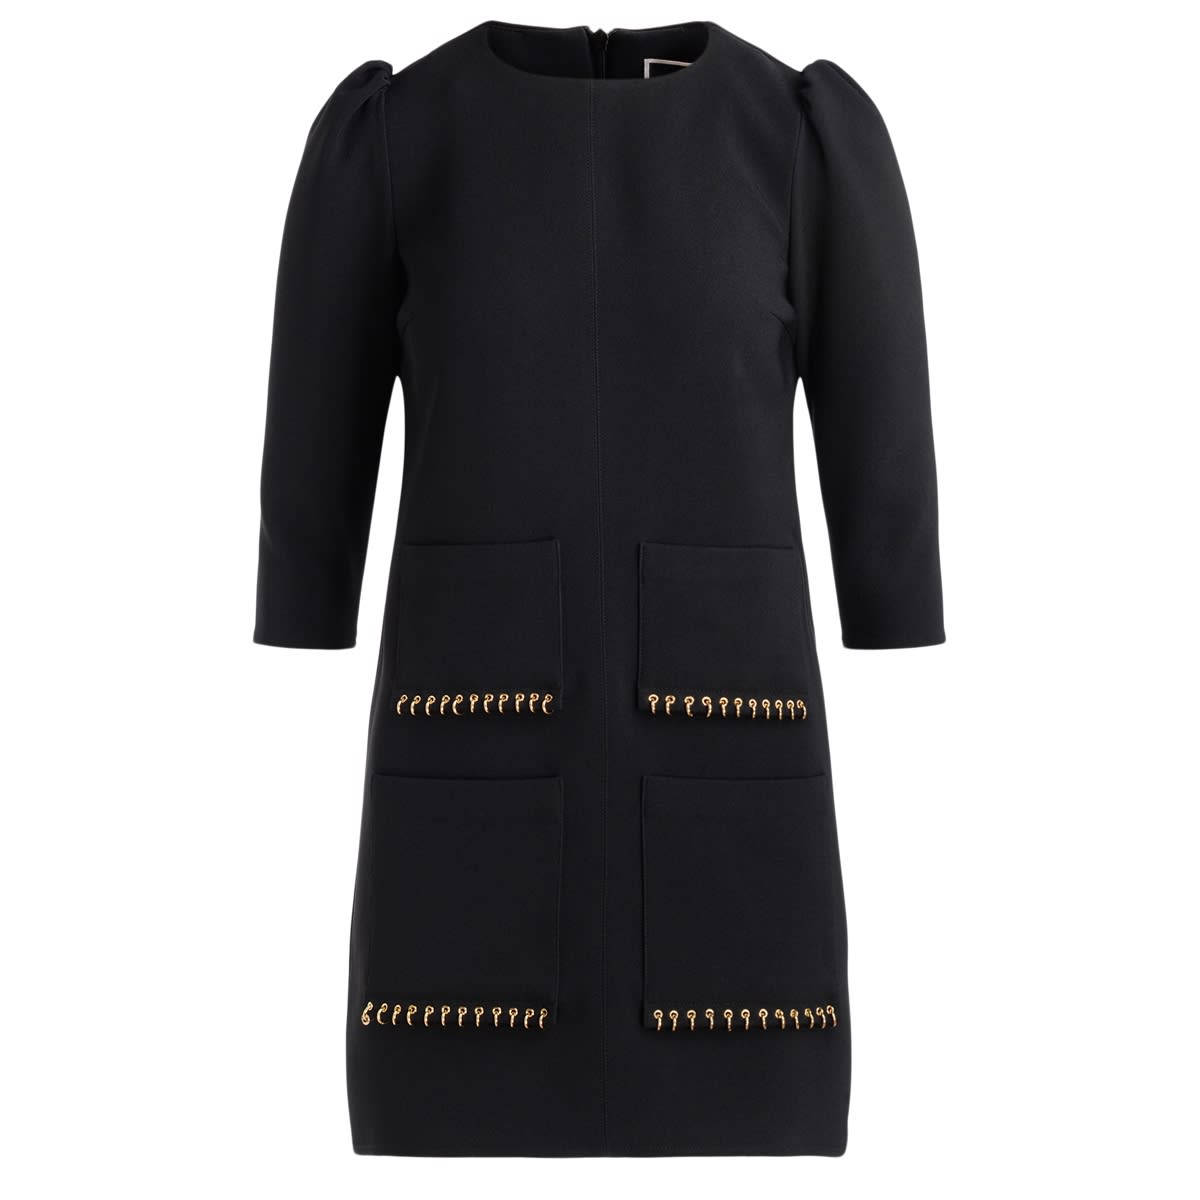 Dress By Elisabetta Franchi In Cr?e Double Black With Gold Rings